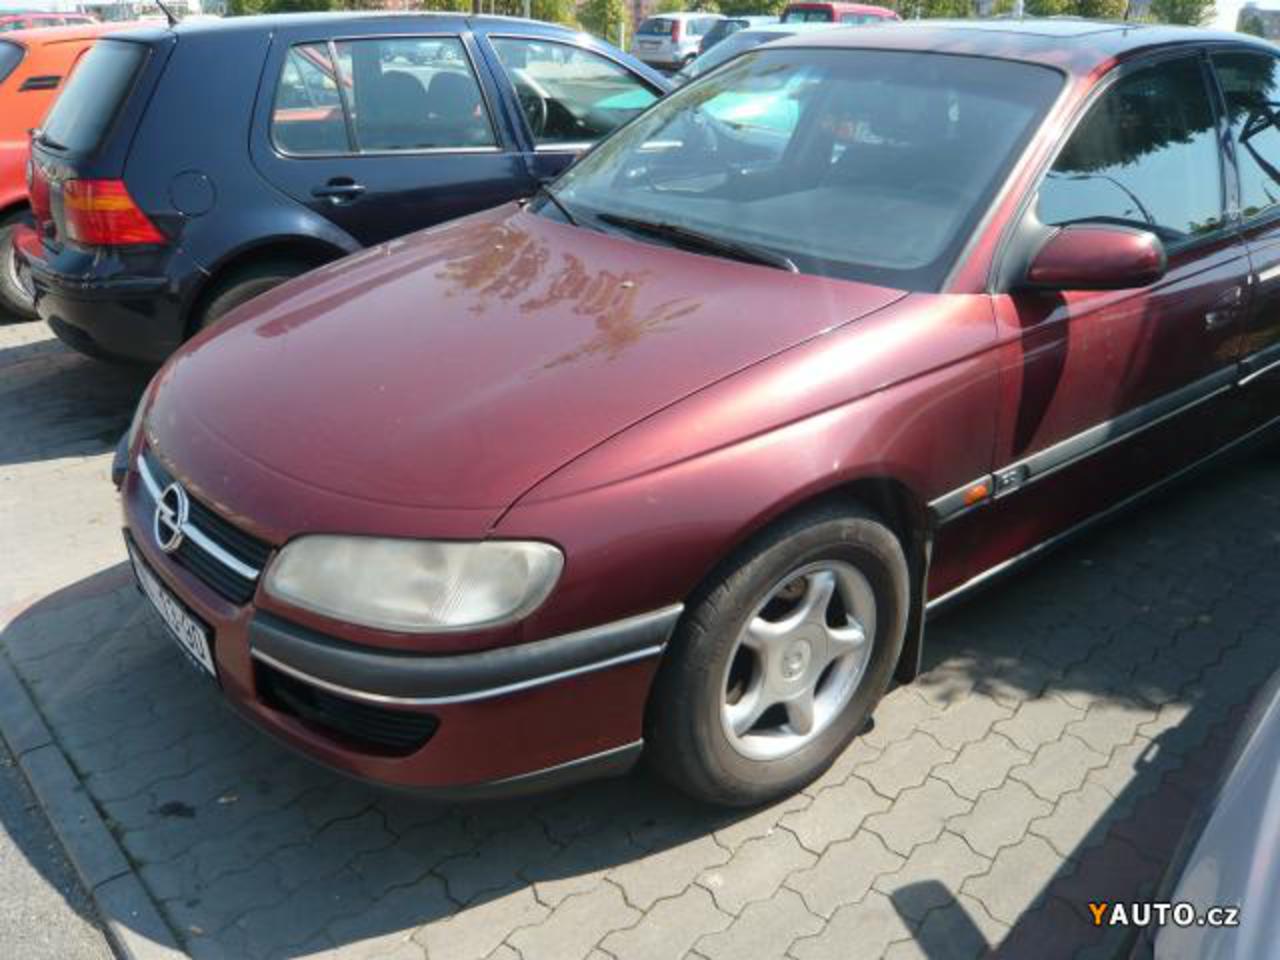 Opel Omega 25 V6. View Download Wallpaper. 640x480. Comments